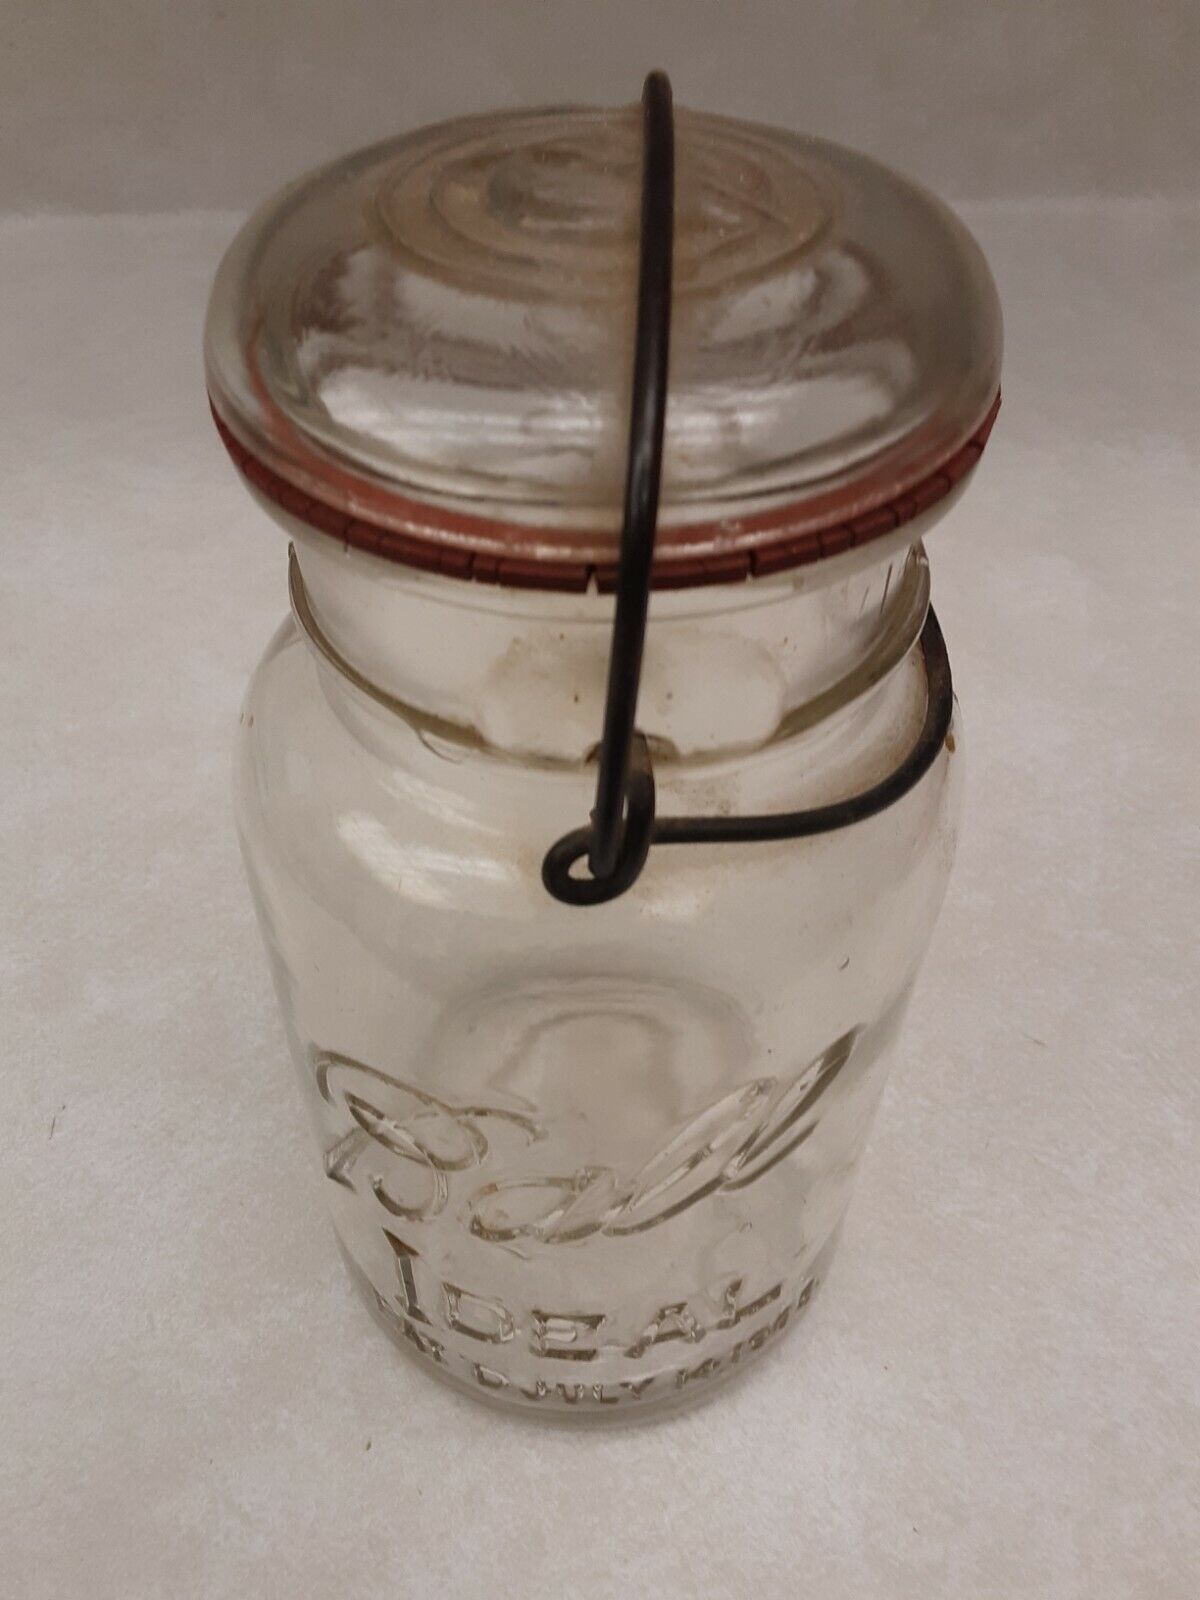 Ball Ideal Vintage Jar Patented July 14 1908 Clear Glass Quart Wire Hold Down